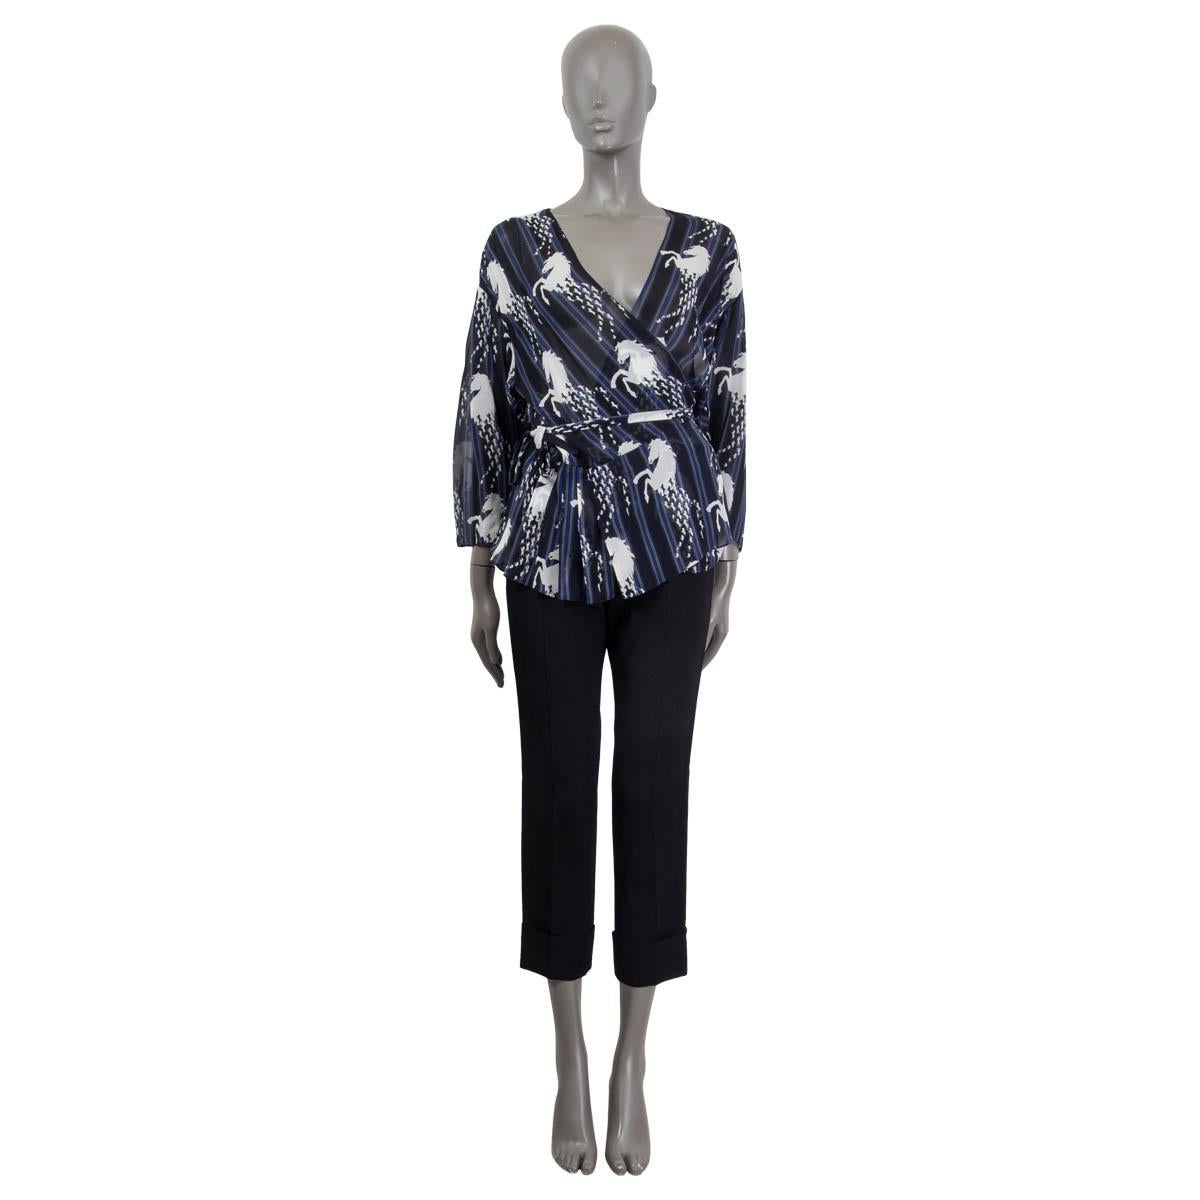 100% authentic Chloé horse print wrap blouse in blue, black and white silk (100%). Opens with a concealed button and a self tie ribbon. Unlined. Has been worn and is in excellent condition.

Measurements
Tag Size	36
Size	XS
Shoulder Width	47cm